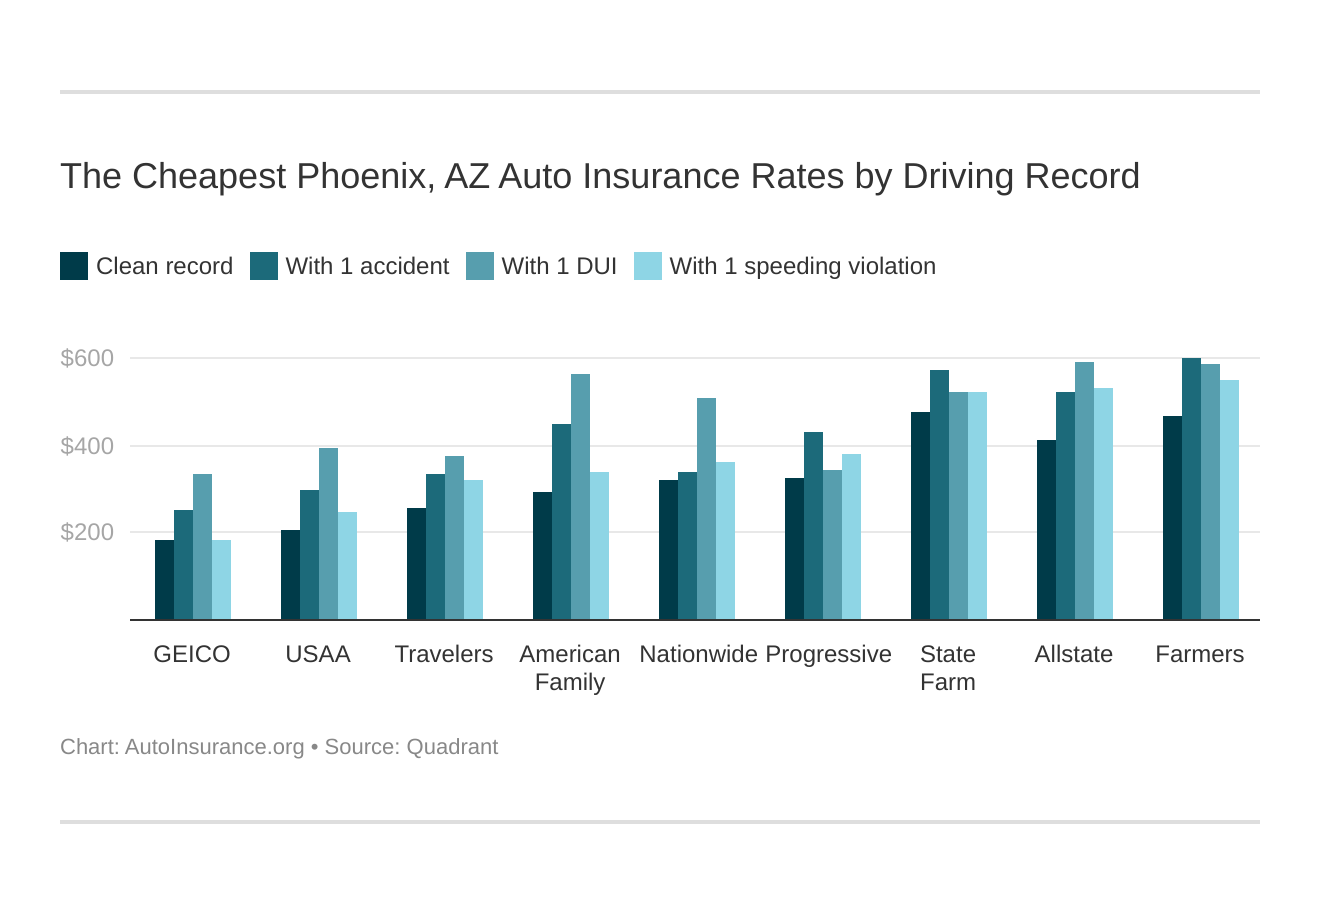 The Cheapest Phoenix, AZ Auto Insurance Rates by Driving Record